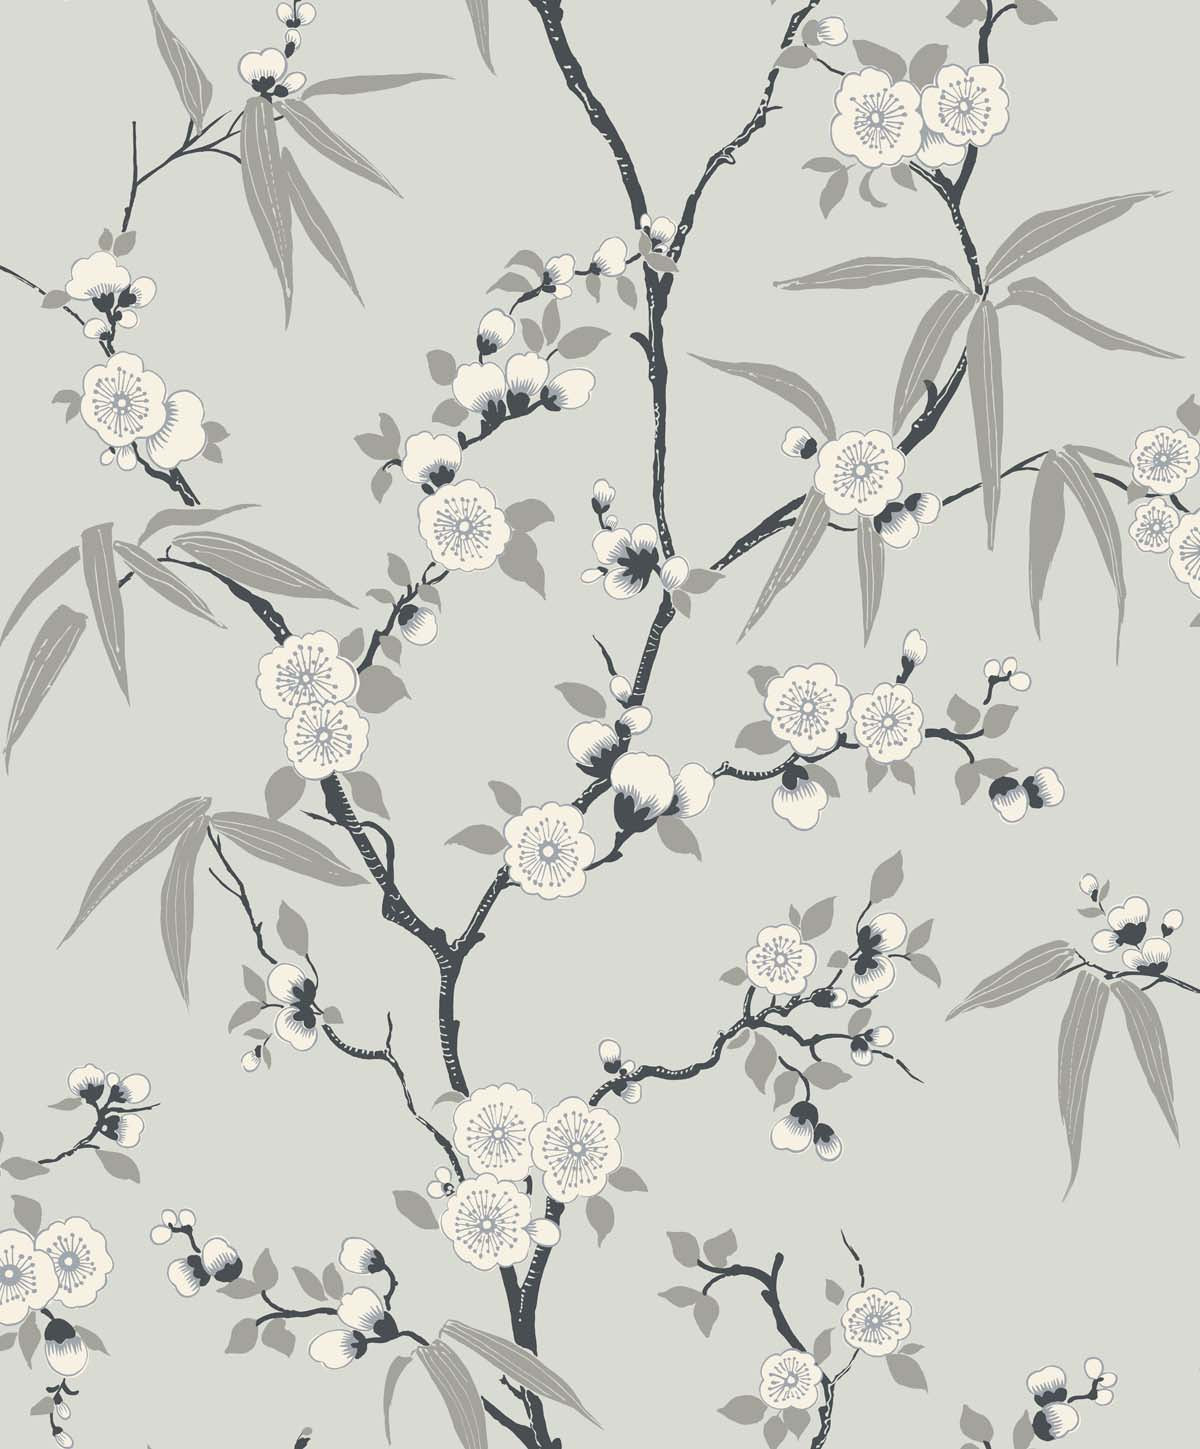 Seabrook Designs EW11100 White Heron Floral Blossom Trail  Wallpaper Stormy